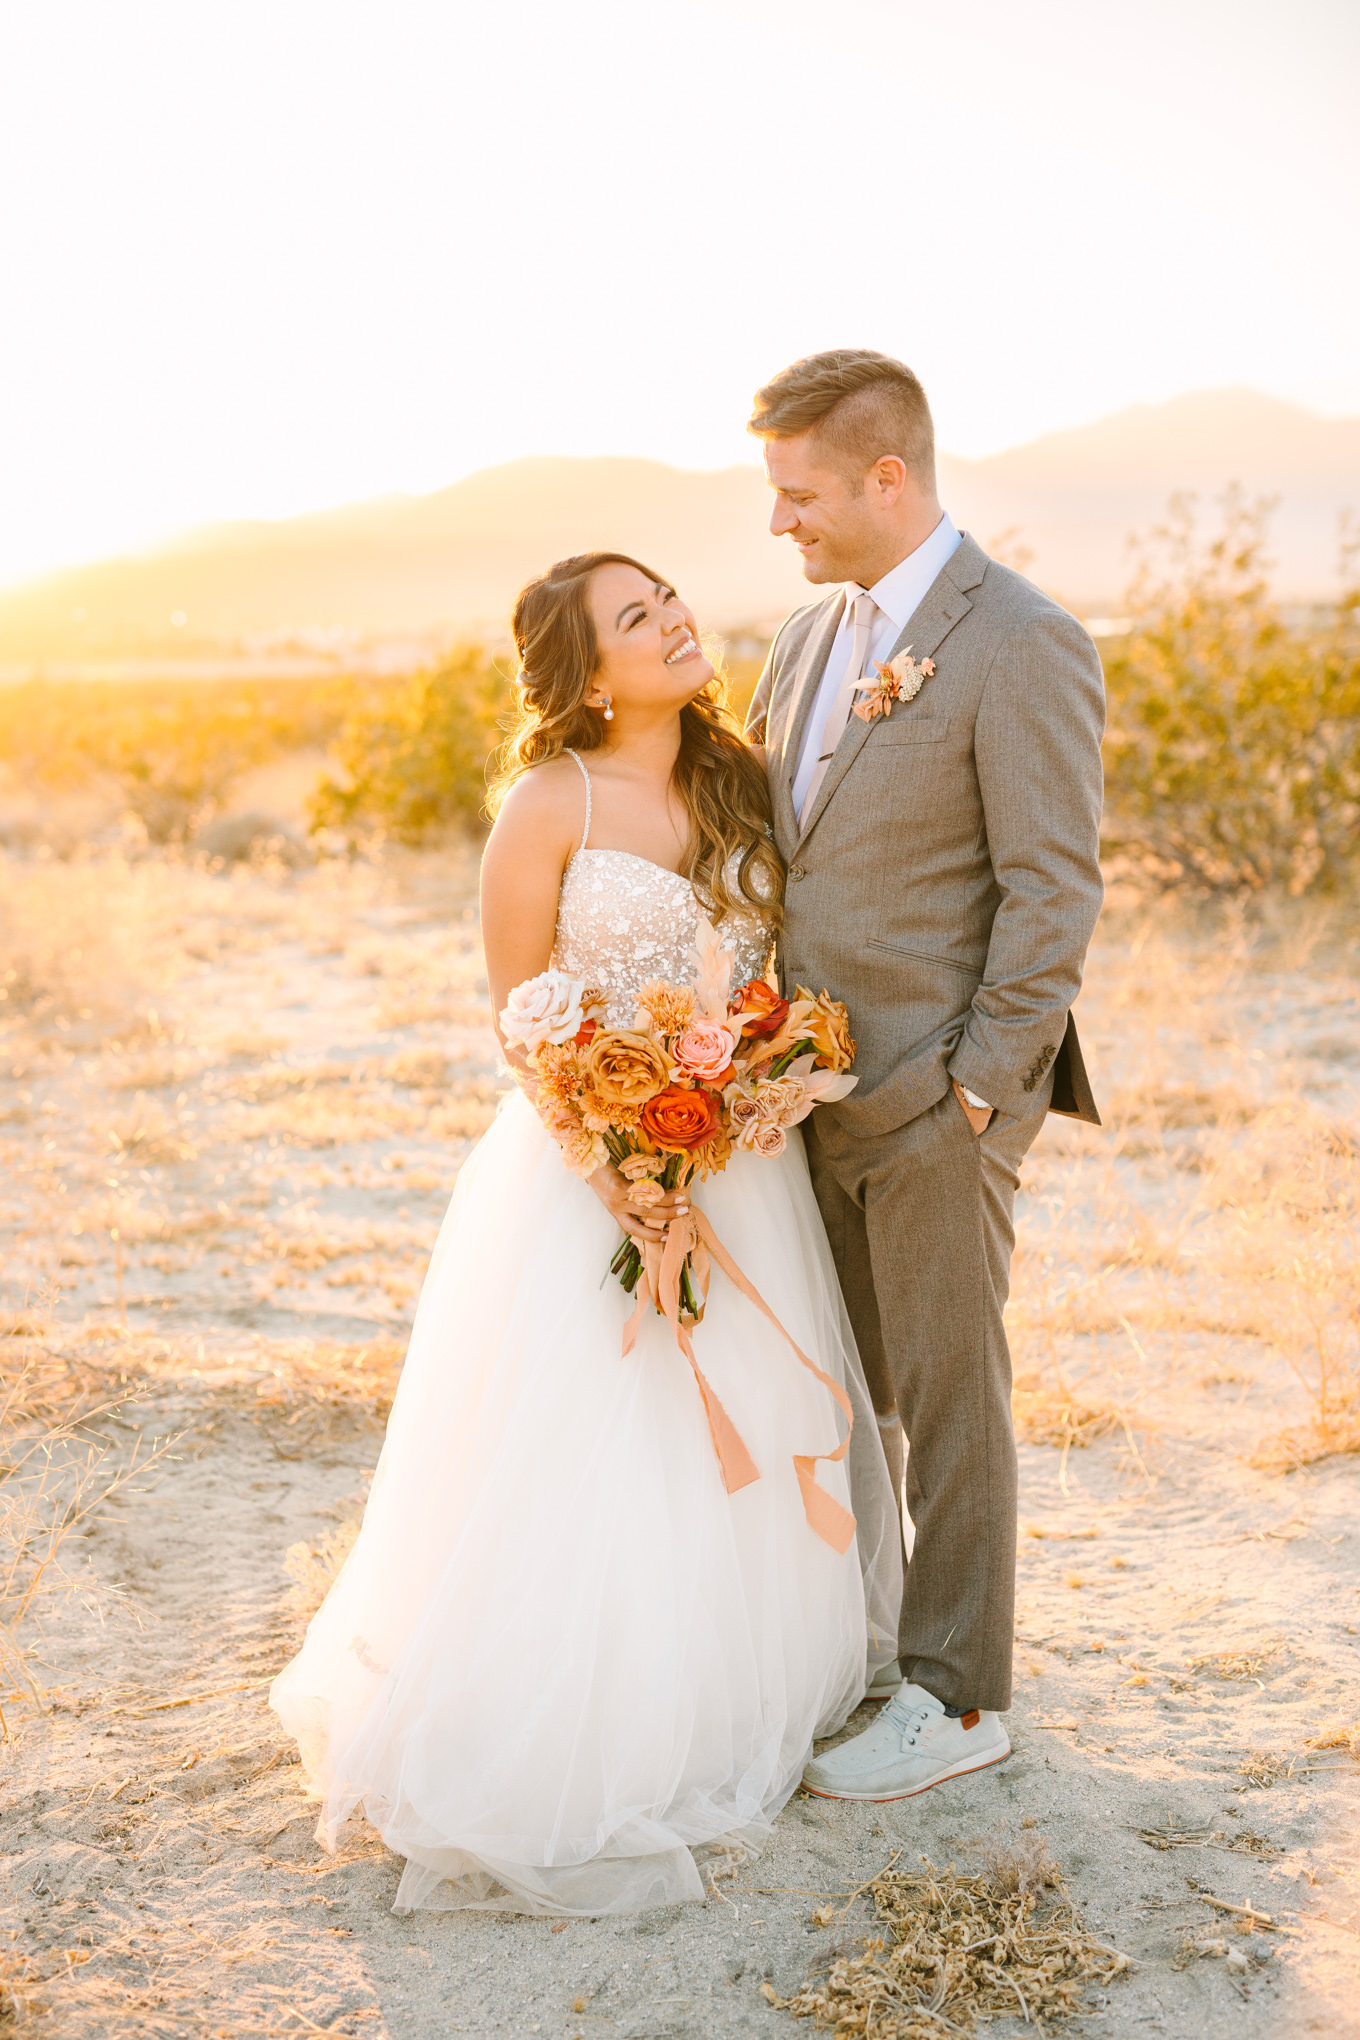 Bride and groom at sunset in the desert | Pink and orange Lautner Compound wedding | Colorful Palm Springs wedding photography | #palmspringsphotographer #palmspringswedding #lautnercompound #southerncaliforniawedding  Source: Mary Costa Photography | Los Angeles